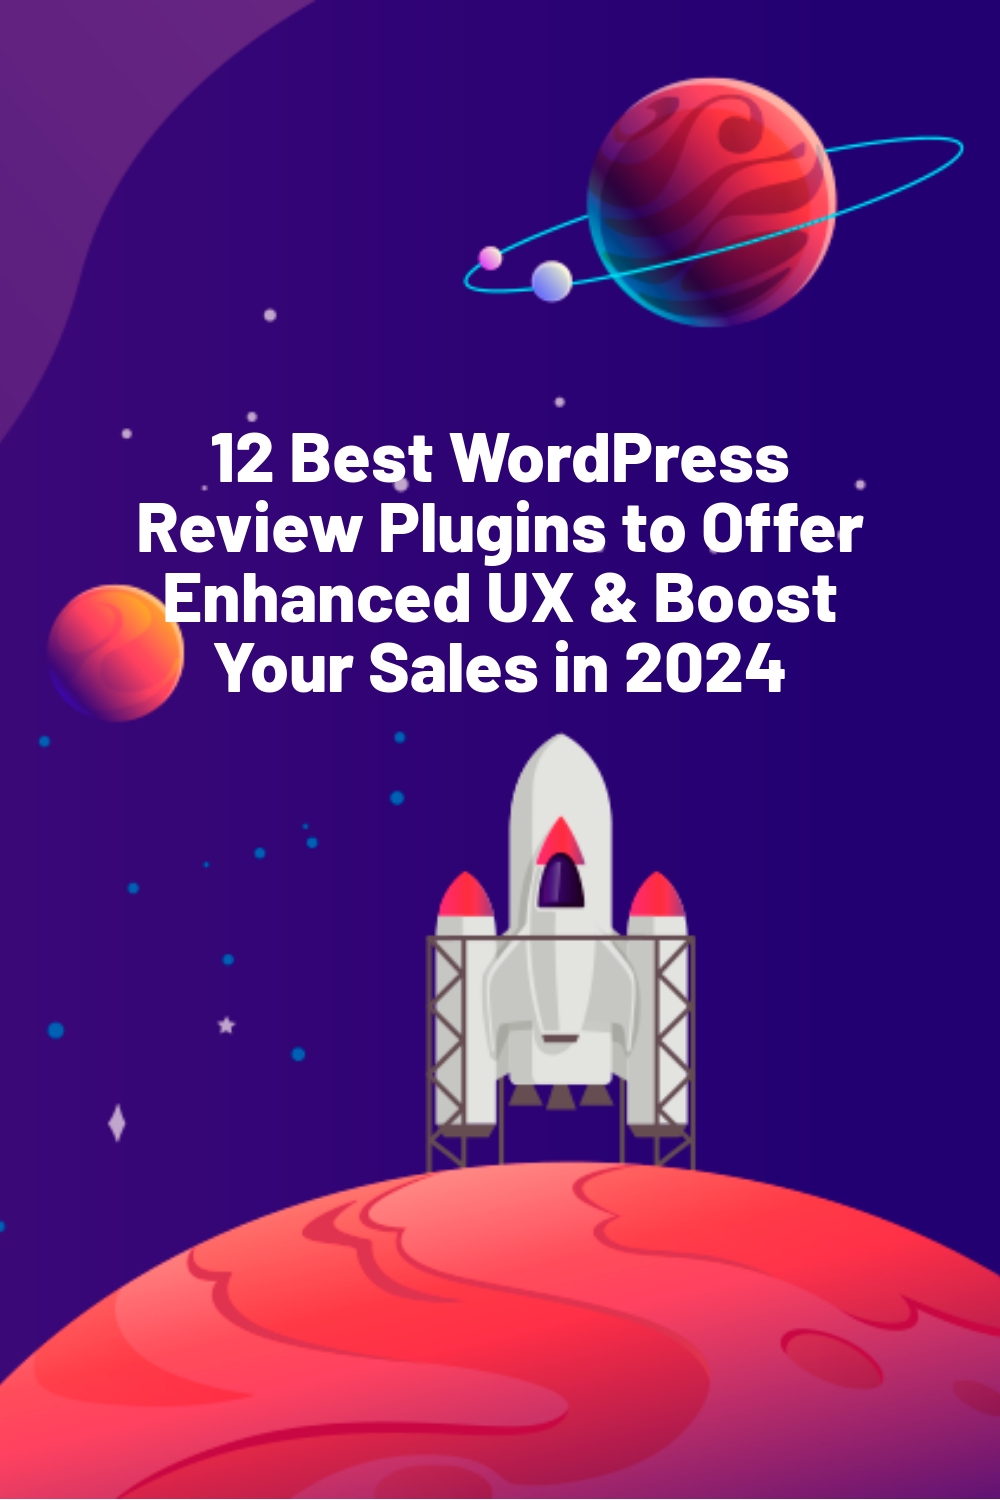 12 Best WordPress Review Plugins to Offer Enhanced UX & Boost Your Sales in 2024